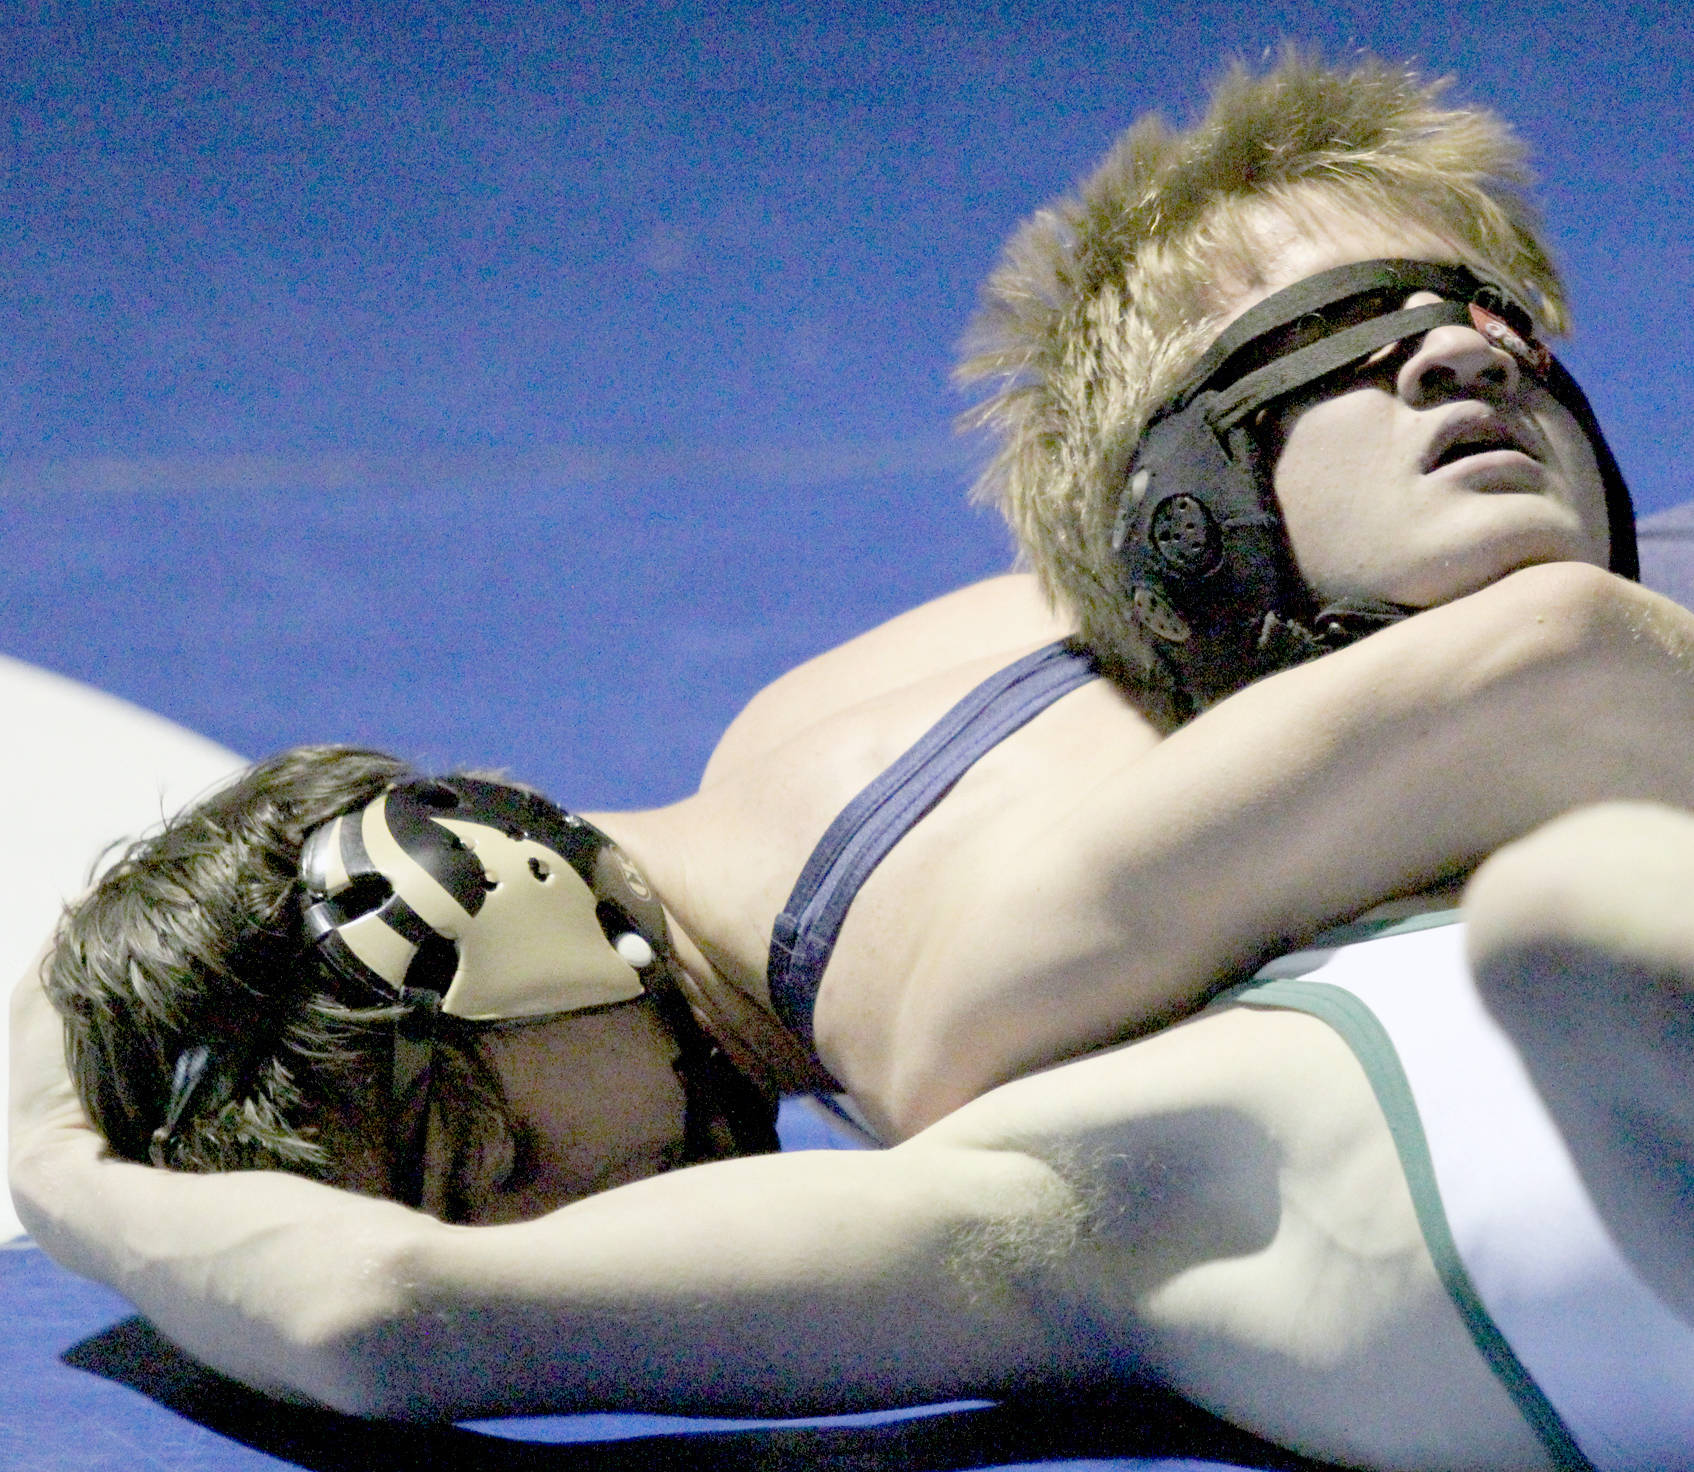 Soldotna’s Gideon Hutchison works to get near fall points against Colony’s Kayden Payne in the 130-pound final of the Northern Lights Conference meet Saturdy at Palmer High School. (Photo by Jeremiah Bartz/Frontiersman)